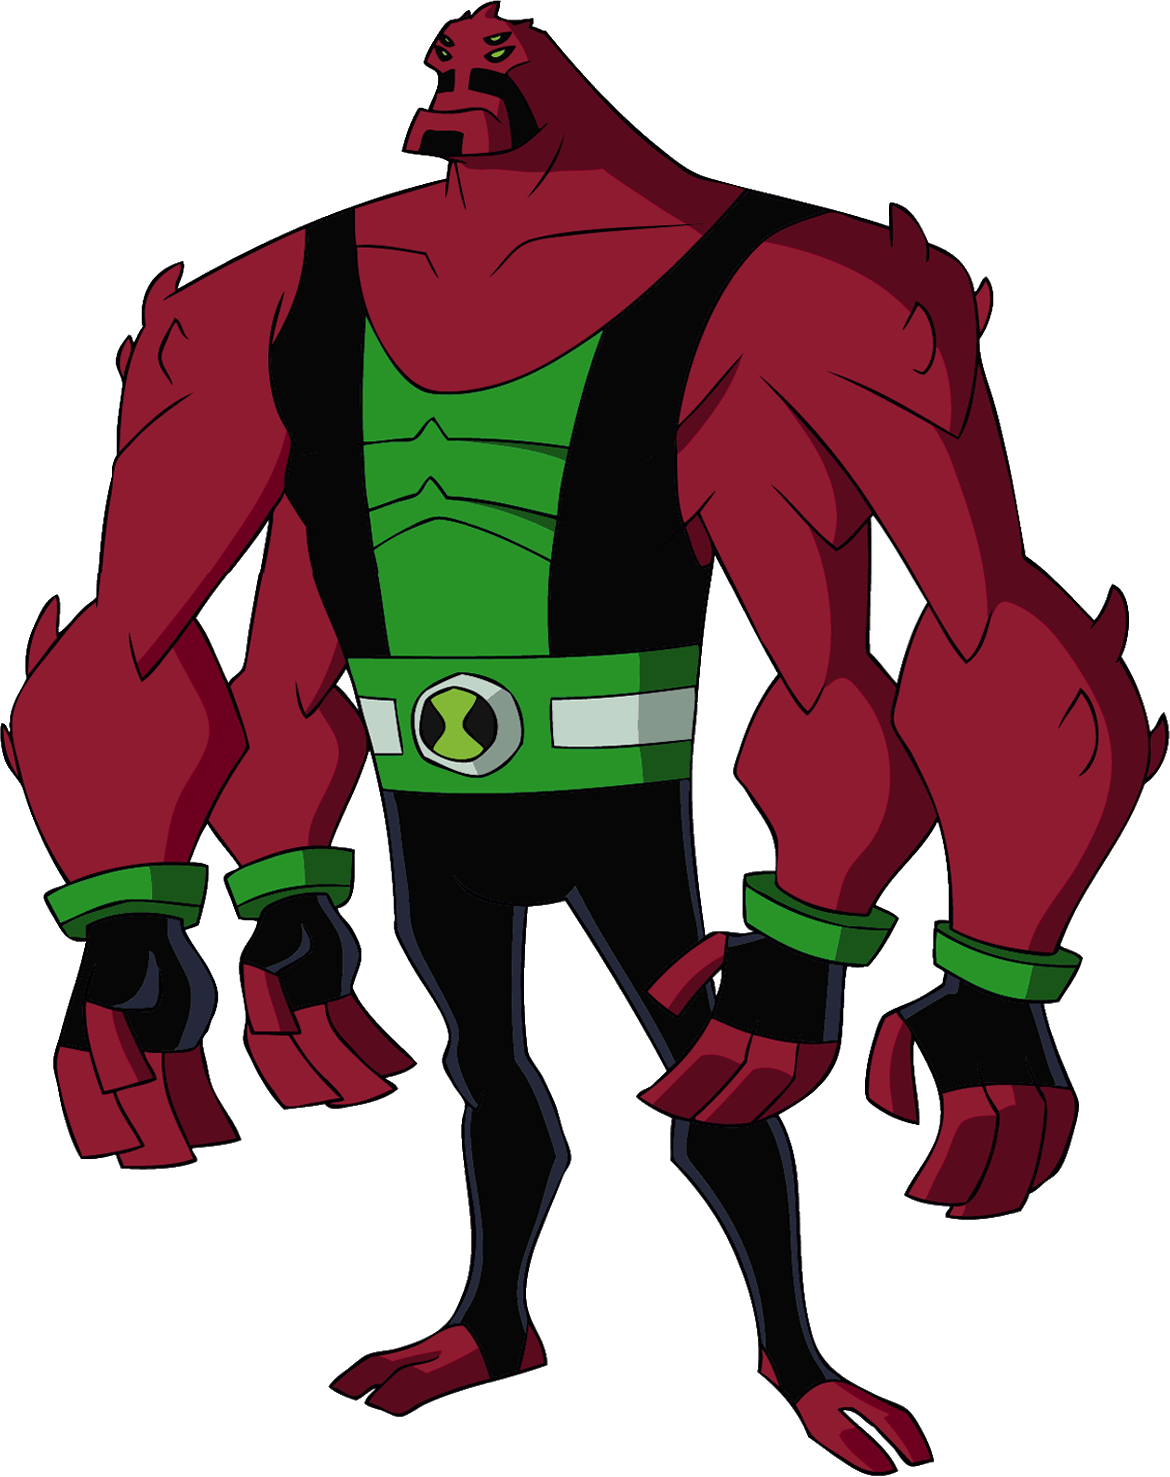 Drawing Marvelous Ben 10 4 Arms 0 Latest Cb 20141231175017 - Ben 10 Four Arms (1170x1477)